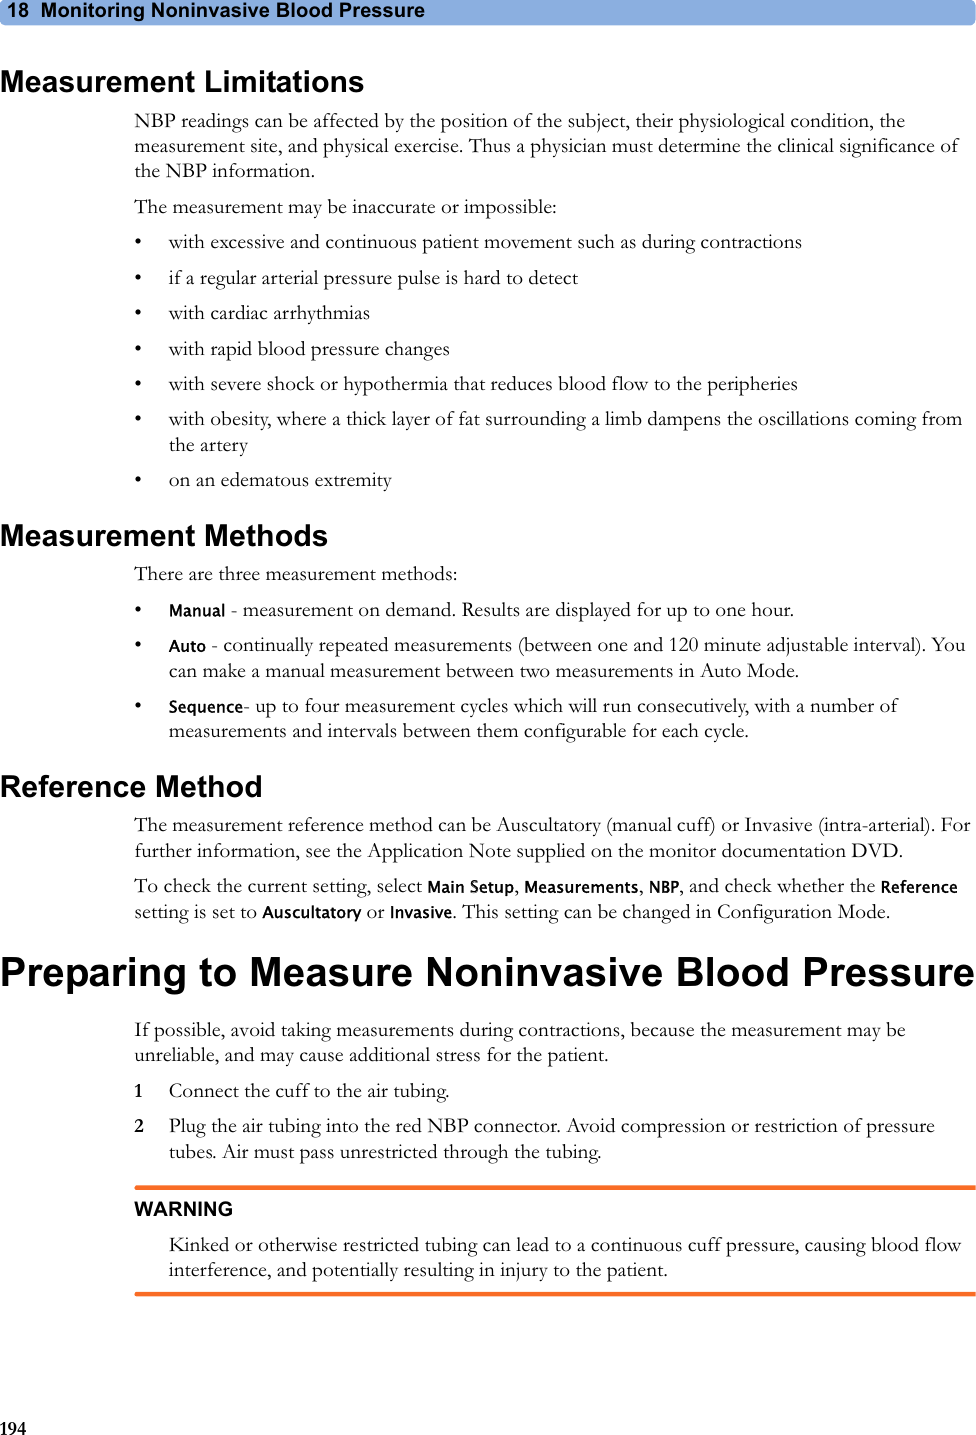 18  Monitoring Noninvasive Blood Pressure194Measurement LimitationsNBP readings can be affected by the position of the subject, their physiological condition, the measurement site, and physical exercise. Thus a physician must determine the clinical significance of the NBP information.The measurement may be inaccurate or impossible:• with excessive and continuous patient movement such as during contractions• if a regular arterial pressure pulse is hard to detect• with cardiac arrhythmias• with rapid blood pressure changes• with severe shock or hypothermia that reduces blood flow to the peripheries• with obesity, where a thick layer of fat surrounding a limb dampens the oscillations coming from the artery• on an edematous extremityMeasurement MethodsThere are three measurement methods:•Manual - measurement on demand. Results are displayed for up to one hour.•Auto - continually repeated measurements (between one and 120 minute adjustable interval). You can make a manual measurement between two measurements in Auto Mode.•Sequence- up to four measurement cycles which will run consecutively, with a number of measurements and intervals between them configurable for each cycle.Reference MethodThe measurement reference method can be Auscultatory (manual cuff) or Invasive (intra-arterial). For further information, see the Application Note supplied on the monitor documentation DVD.To check the current setting, select Main Setup, Measurements, NBP, and check whether the Reference setting is set to Auscultatory or Invasive. This setting can be changed in Configuration Mode.Preparing to Measure Noninvasive Blood PressureIf possible, avoid taking measurements during contractions, because the measurement may be unreliable, and may cause additional stress for the patient.1Connect the cuff to the air tubing.2Plug the air tubing into the red NBP connector. Avoid compression or restriction of pressure tubes. Air must pass unrestricted through the tubing.WARNINGKinked or otherwise restricted tubing can lead to a continuous cuff pressure, causing blood flow interference, and potentially resulting in injury to the patient.